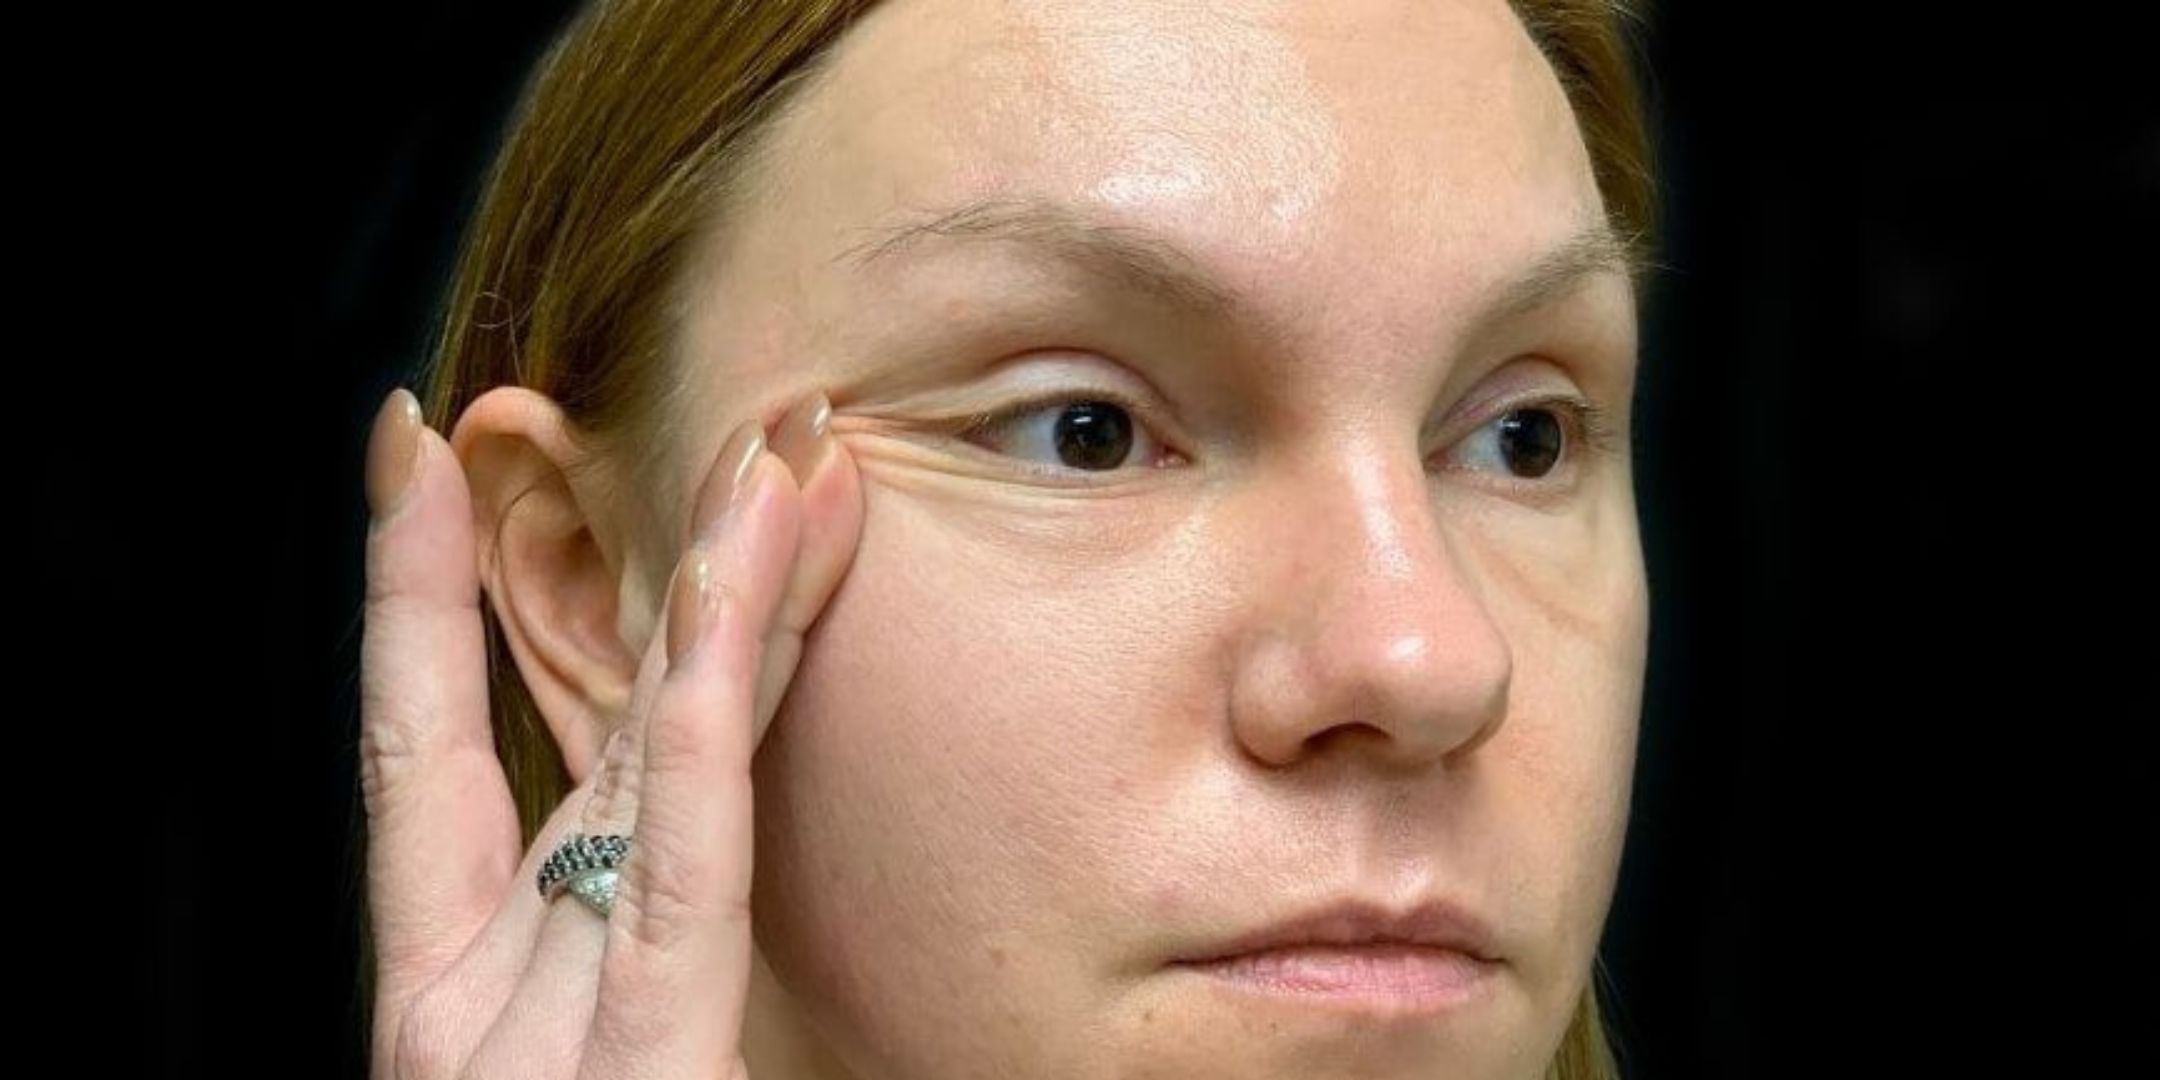 Malar Festoons Exercises: First Step To Treat Eyelid Bags